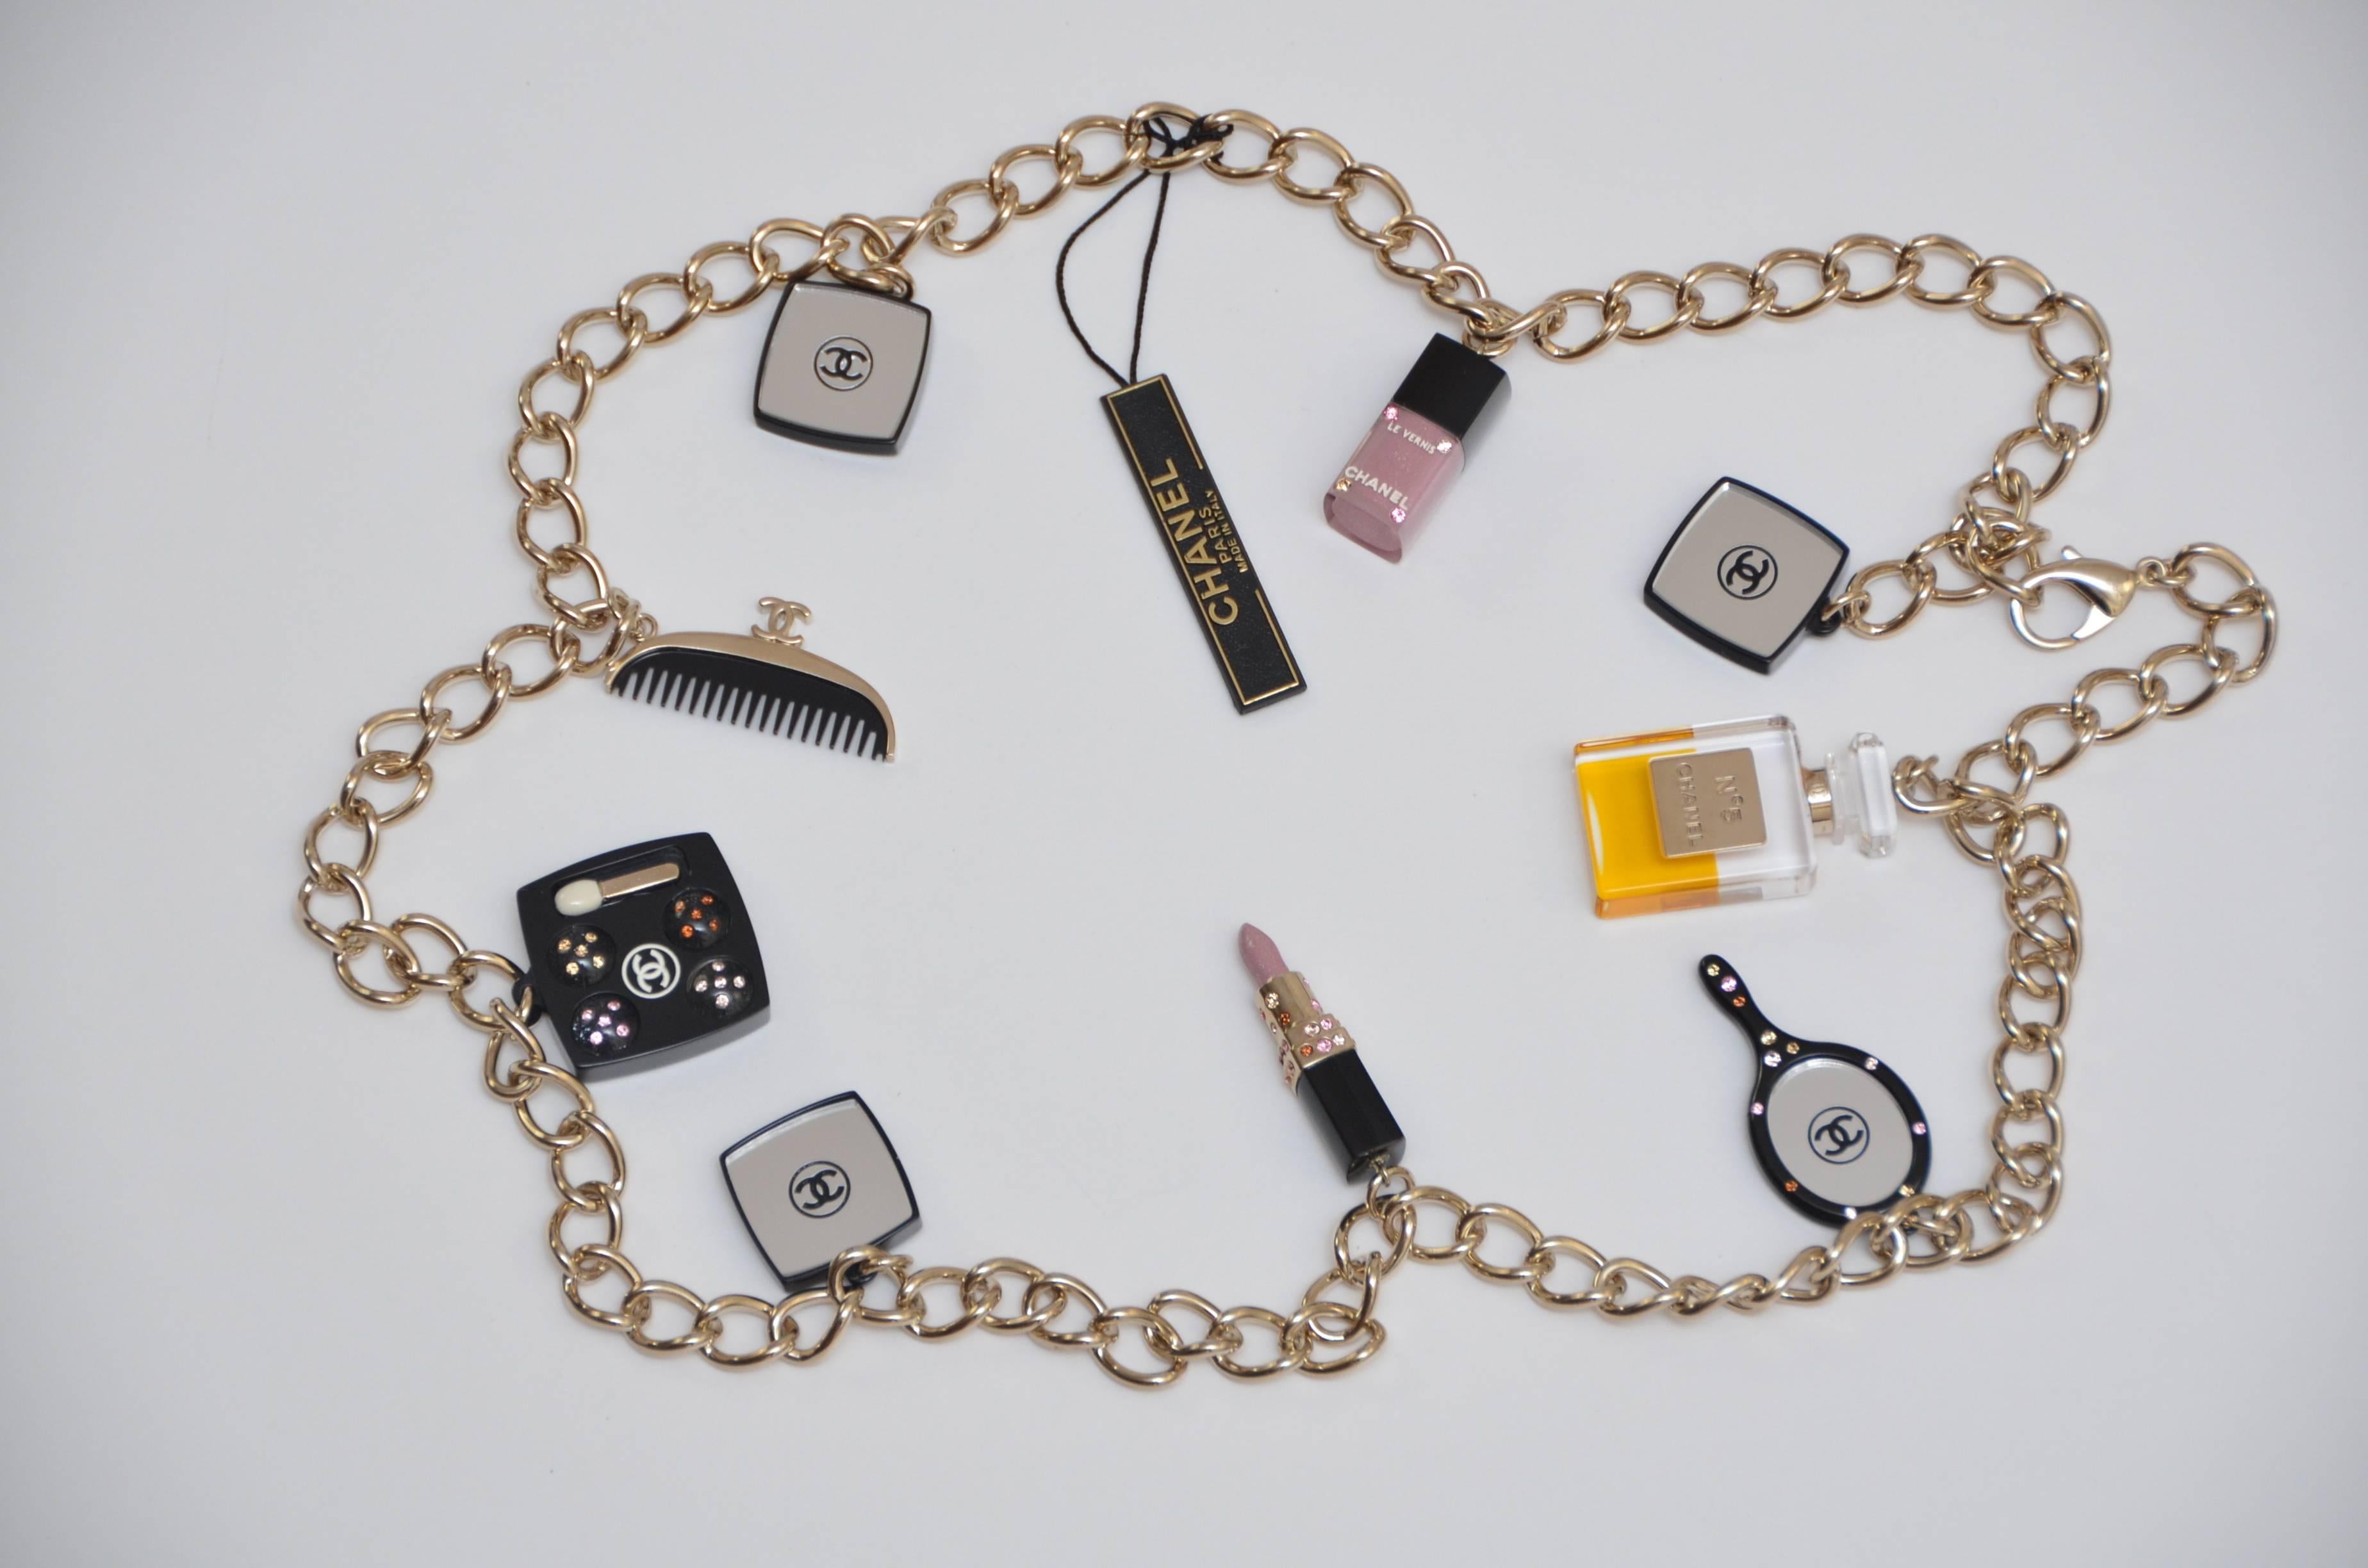 Very rare Chanel makeup necklace from 2008 collection.
Beautiful charm necklace featuring 9 make up charms as ...nail polish,mirror,eyeshadow compact,Chanel 5 perfume bottle,comb.....
Chain is light gold tone color (something between gold/silver